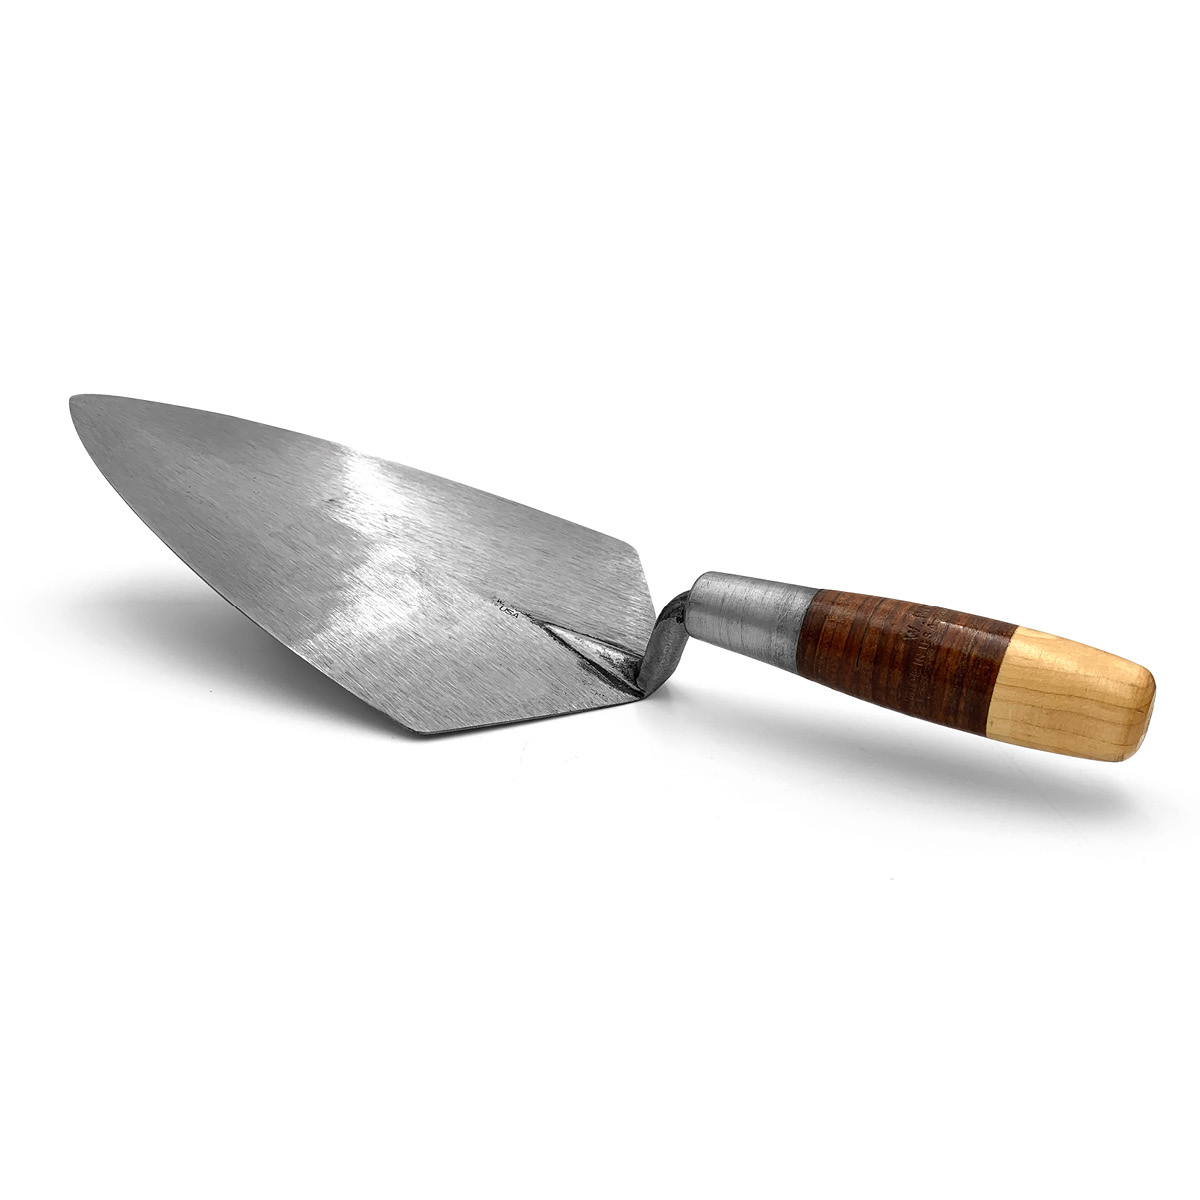 Wide heel w.rose trowels with leather handles are available in the United Kingdom via the online shop at Speedcrete.